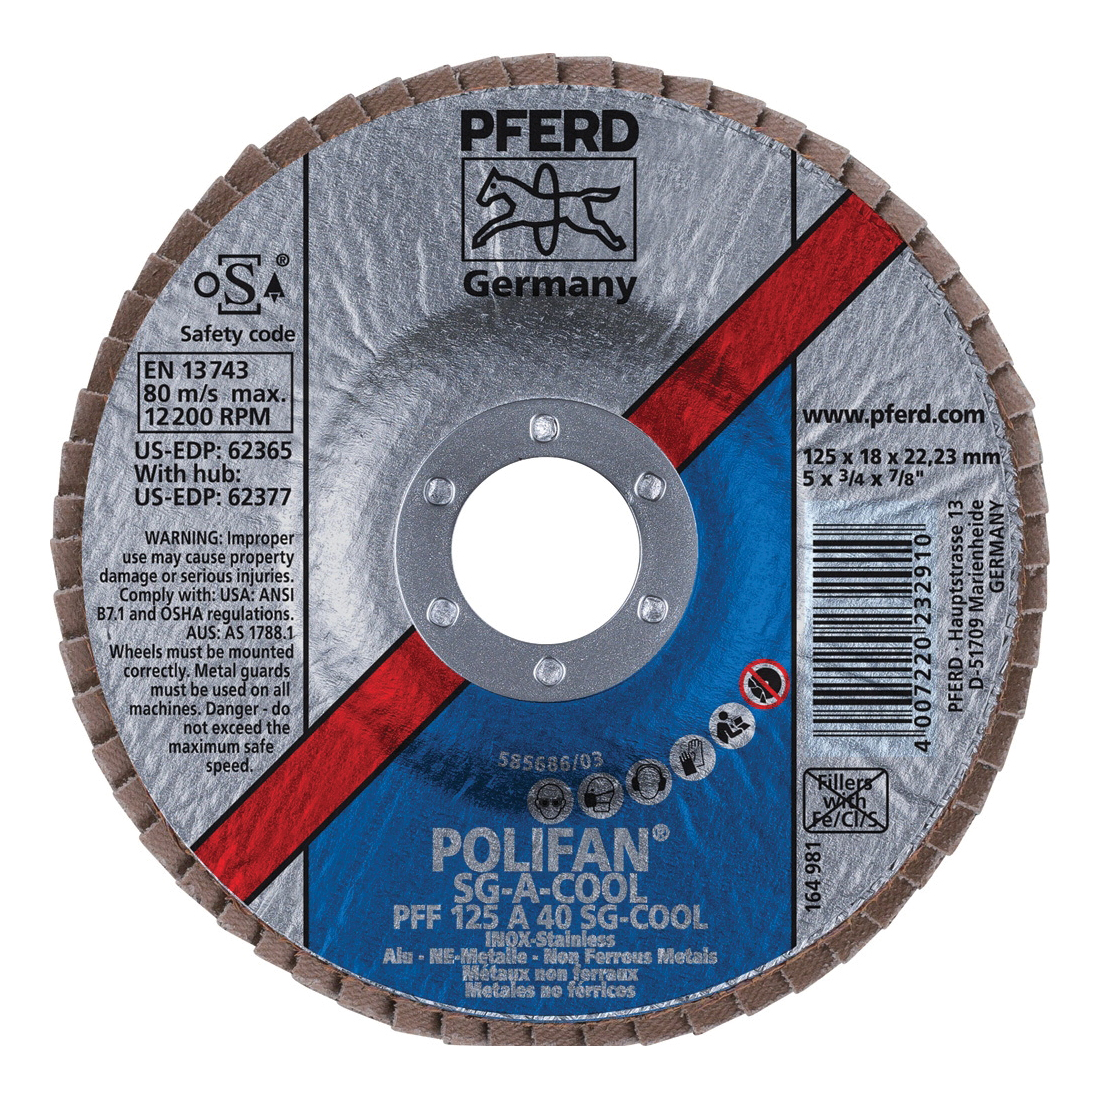 PFERD Polifan® 62365 Performance Line SG A-COOL Unthreaded Coated Abrasive Flap Disc, 5 in Dia, 7/8 in Center Hole, 40 Grit, Aluminum Oxide Abrasive, Type 27 Flat Disc